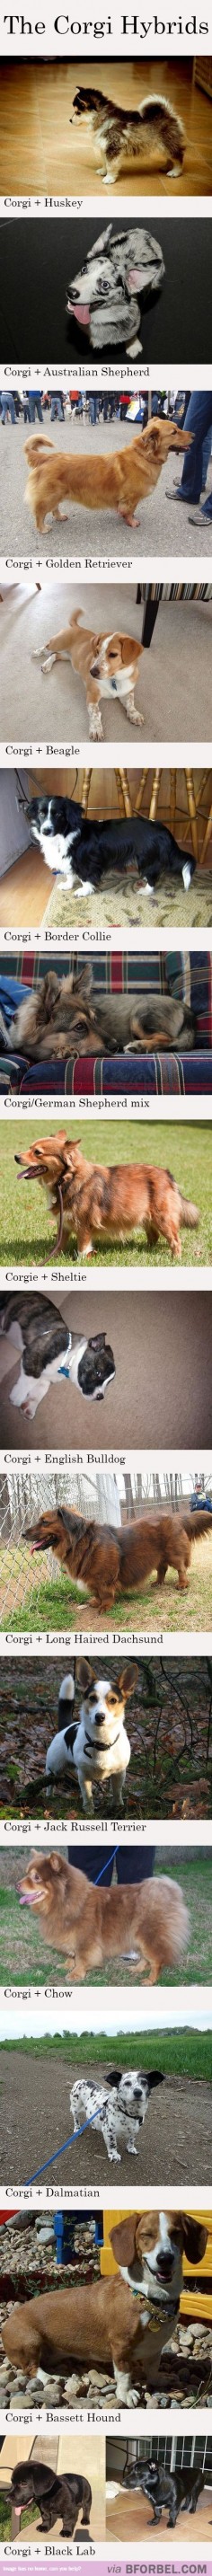 14 Of The Most Adorable Corgi Hybrids…I have a Corgador!!!!! She looks just like the one in the last picture